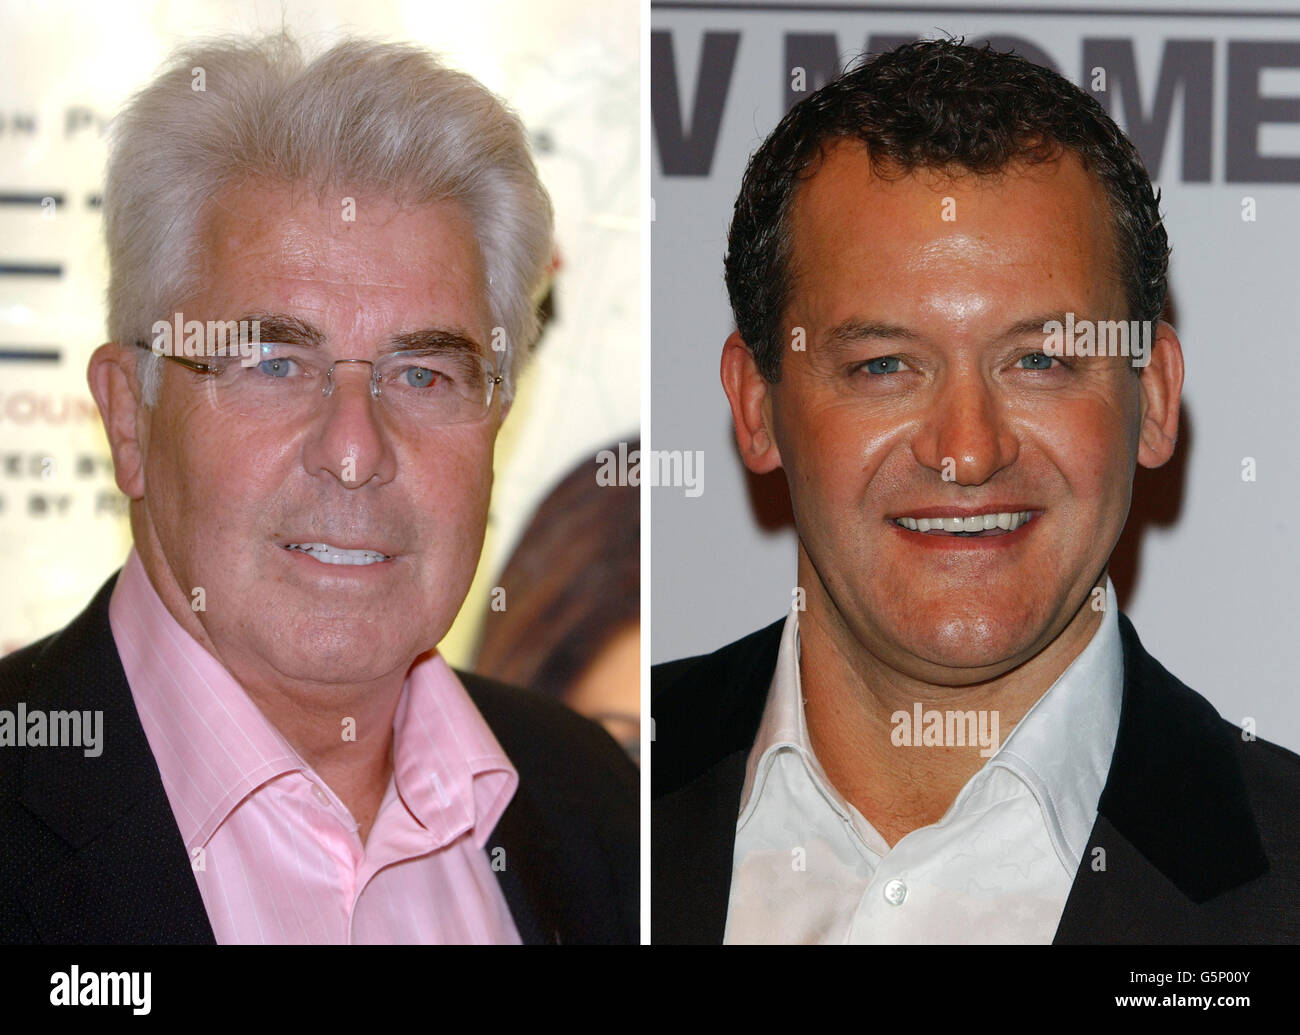 Undated file photos of Max Clifford (left) and Paul Burrell. The PR guru has denied claims by the former royal butler Paul Burrell that he breached his confidentiality by passing personal details about him to the News of the World. Stock Photo